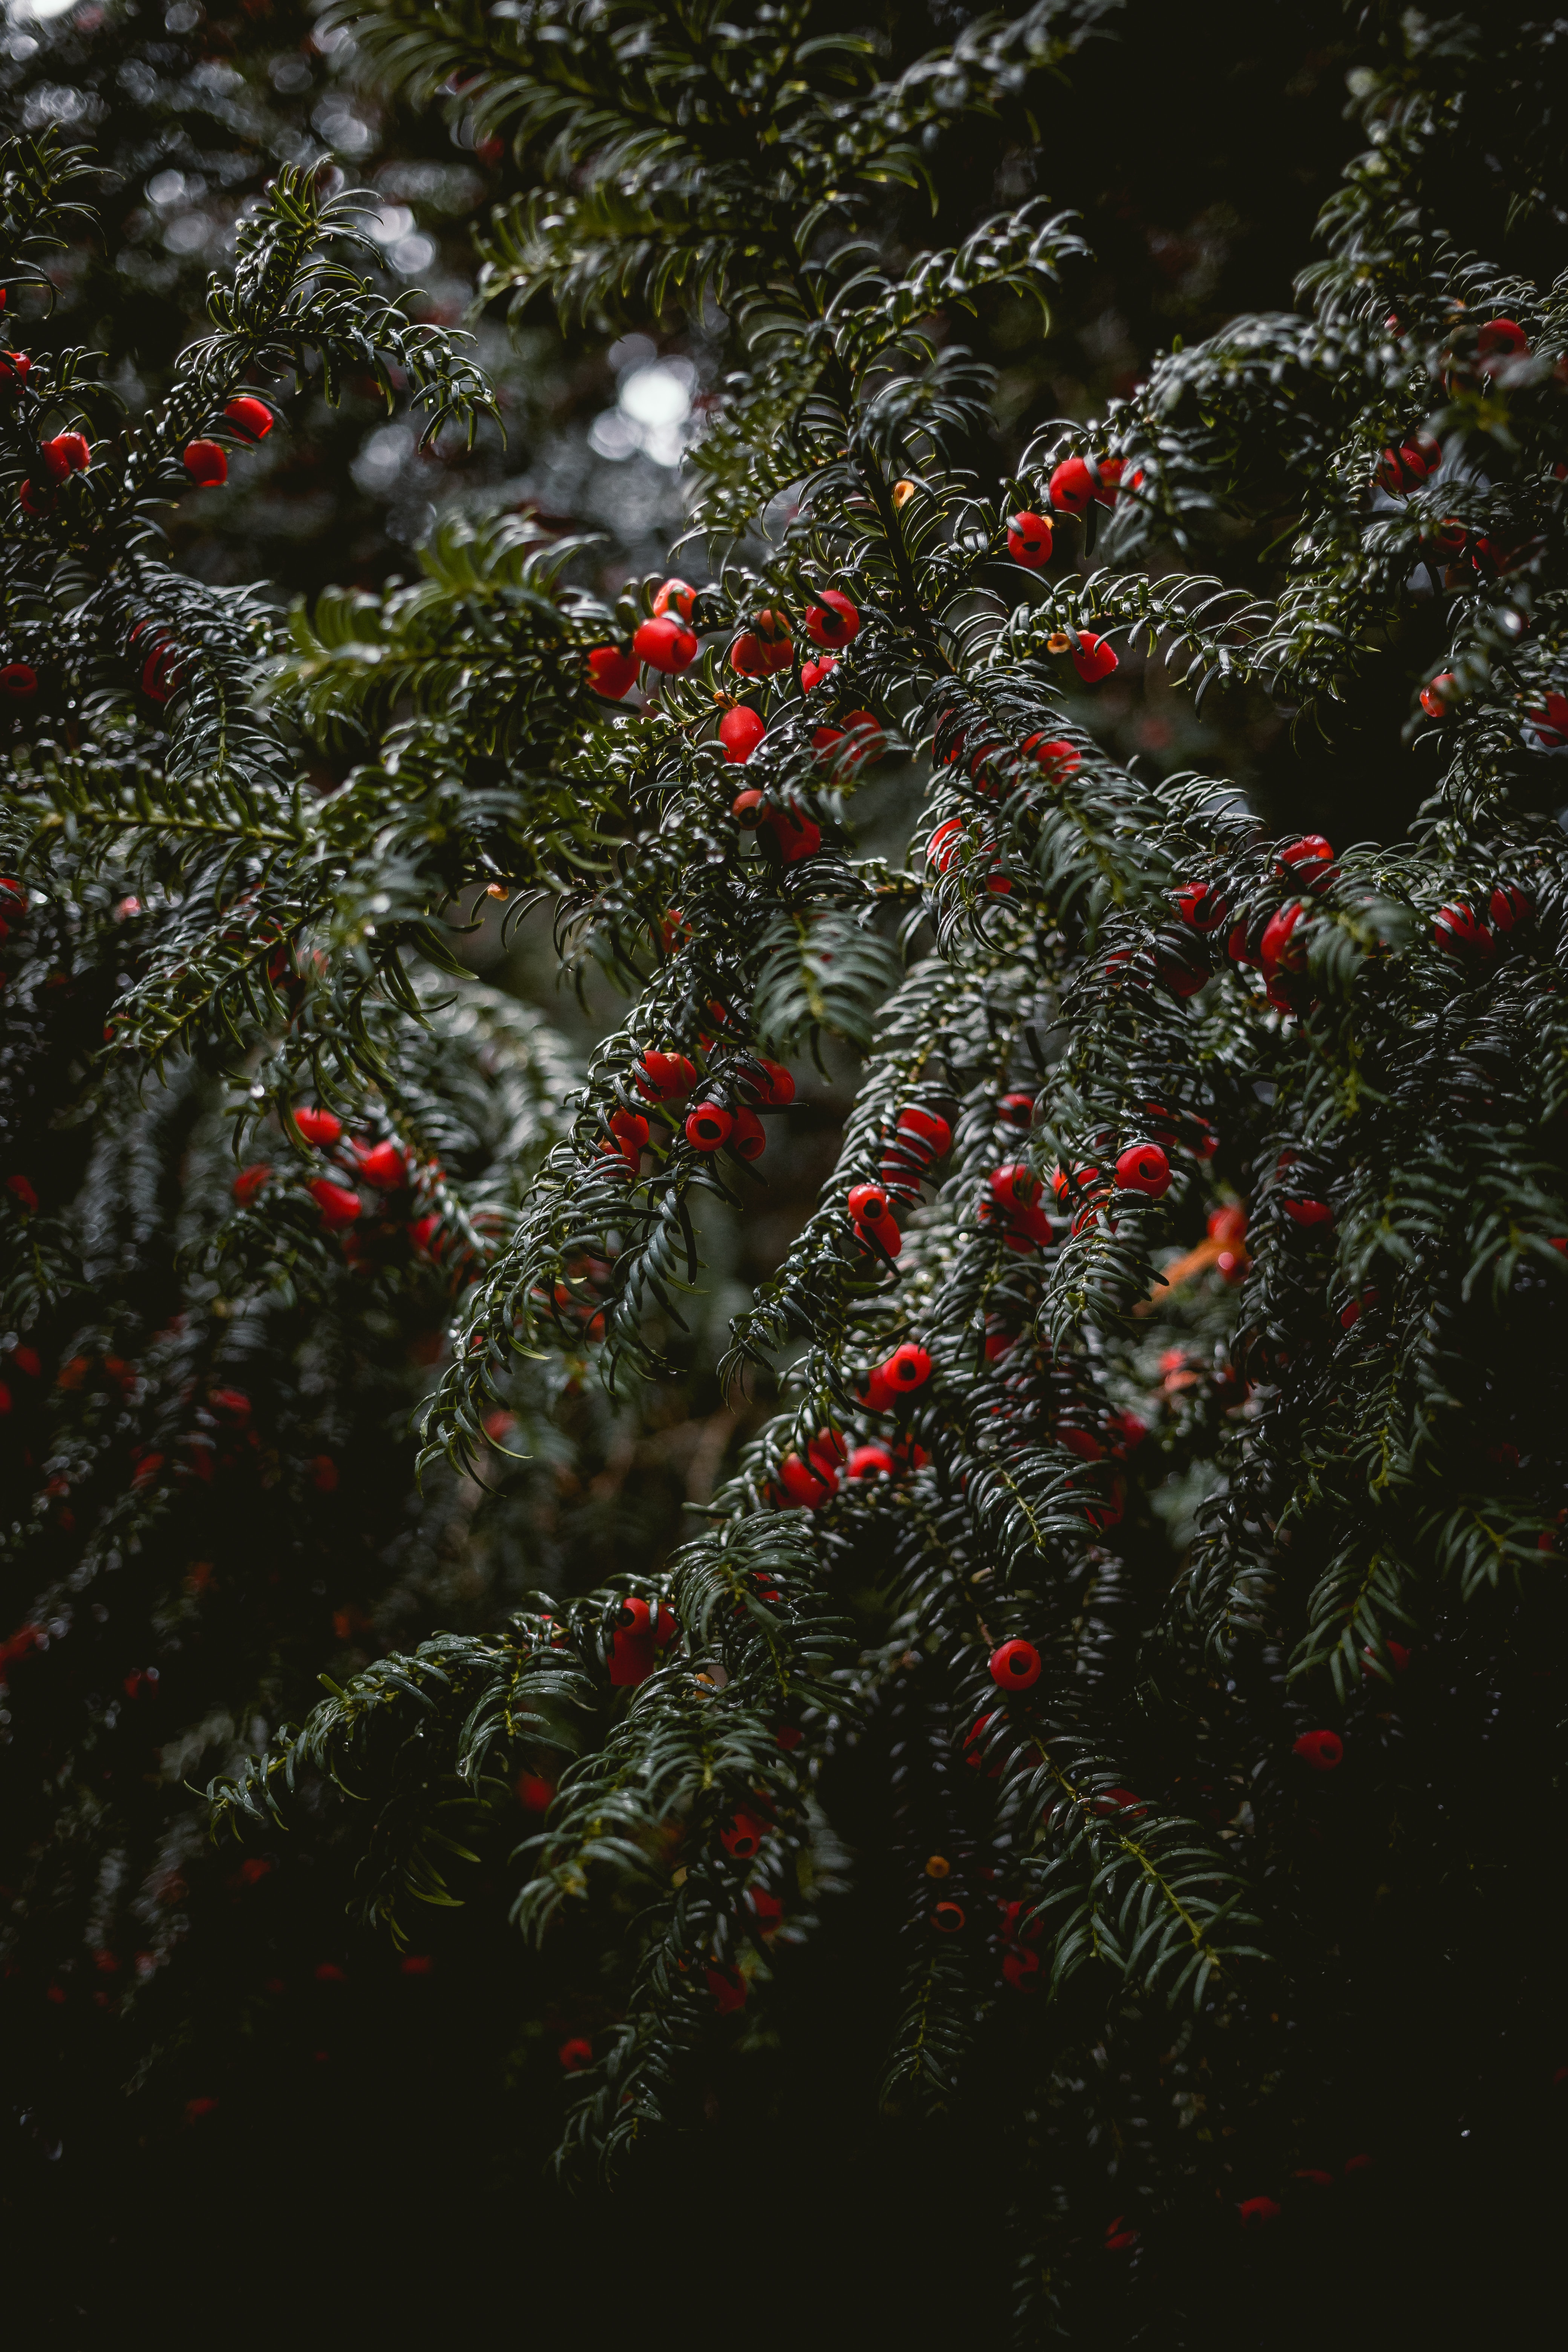 wet, nature, berries, red, plant, branches 2160p